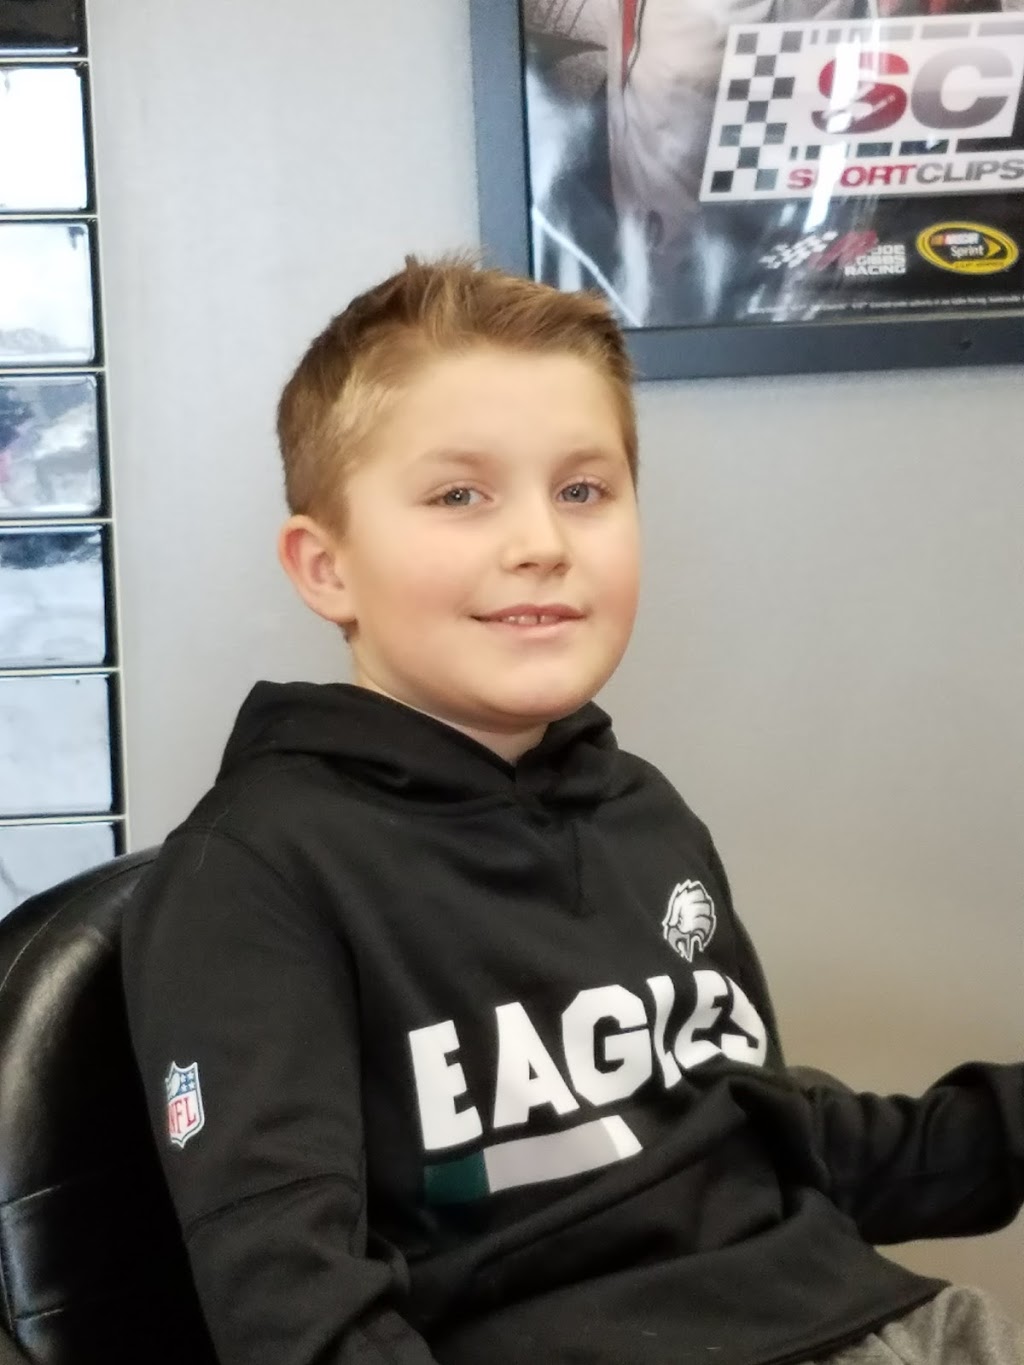 Sport Clips Haircuts of Brookhaven | 4908 Edgmont Ave, Brookhaven, PA 19015 | Phone: (484) 480-3527